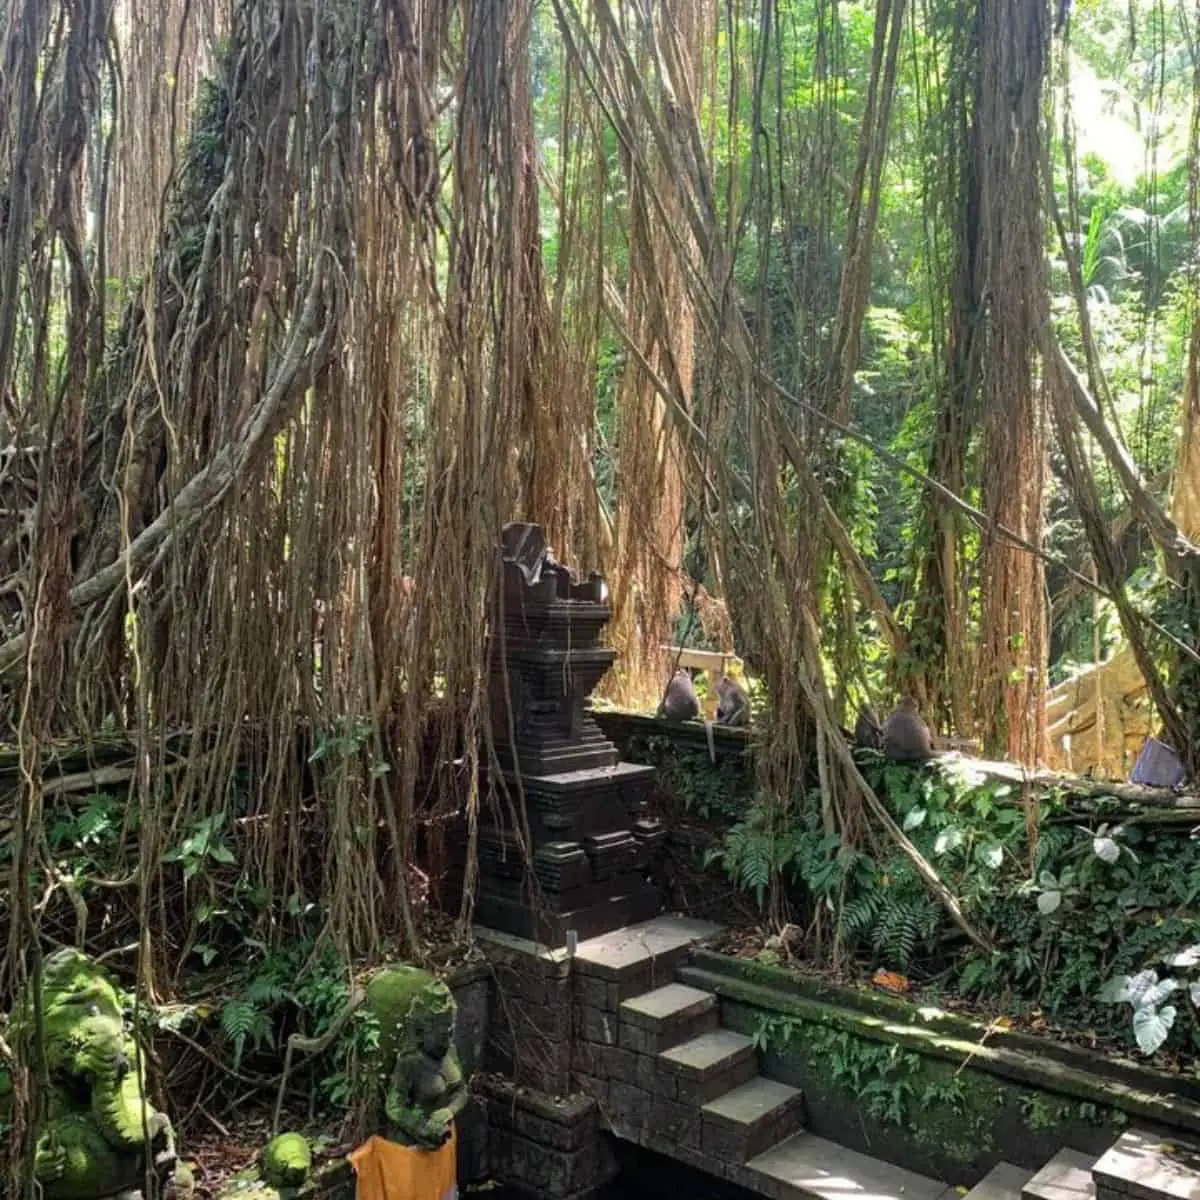 Vines in the middle of a forest and a carved imagery in Ubud Monkey Forest